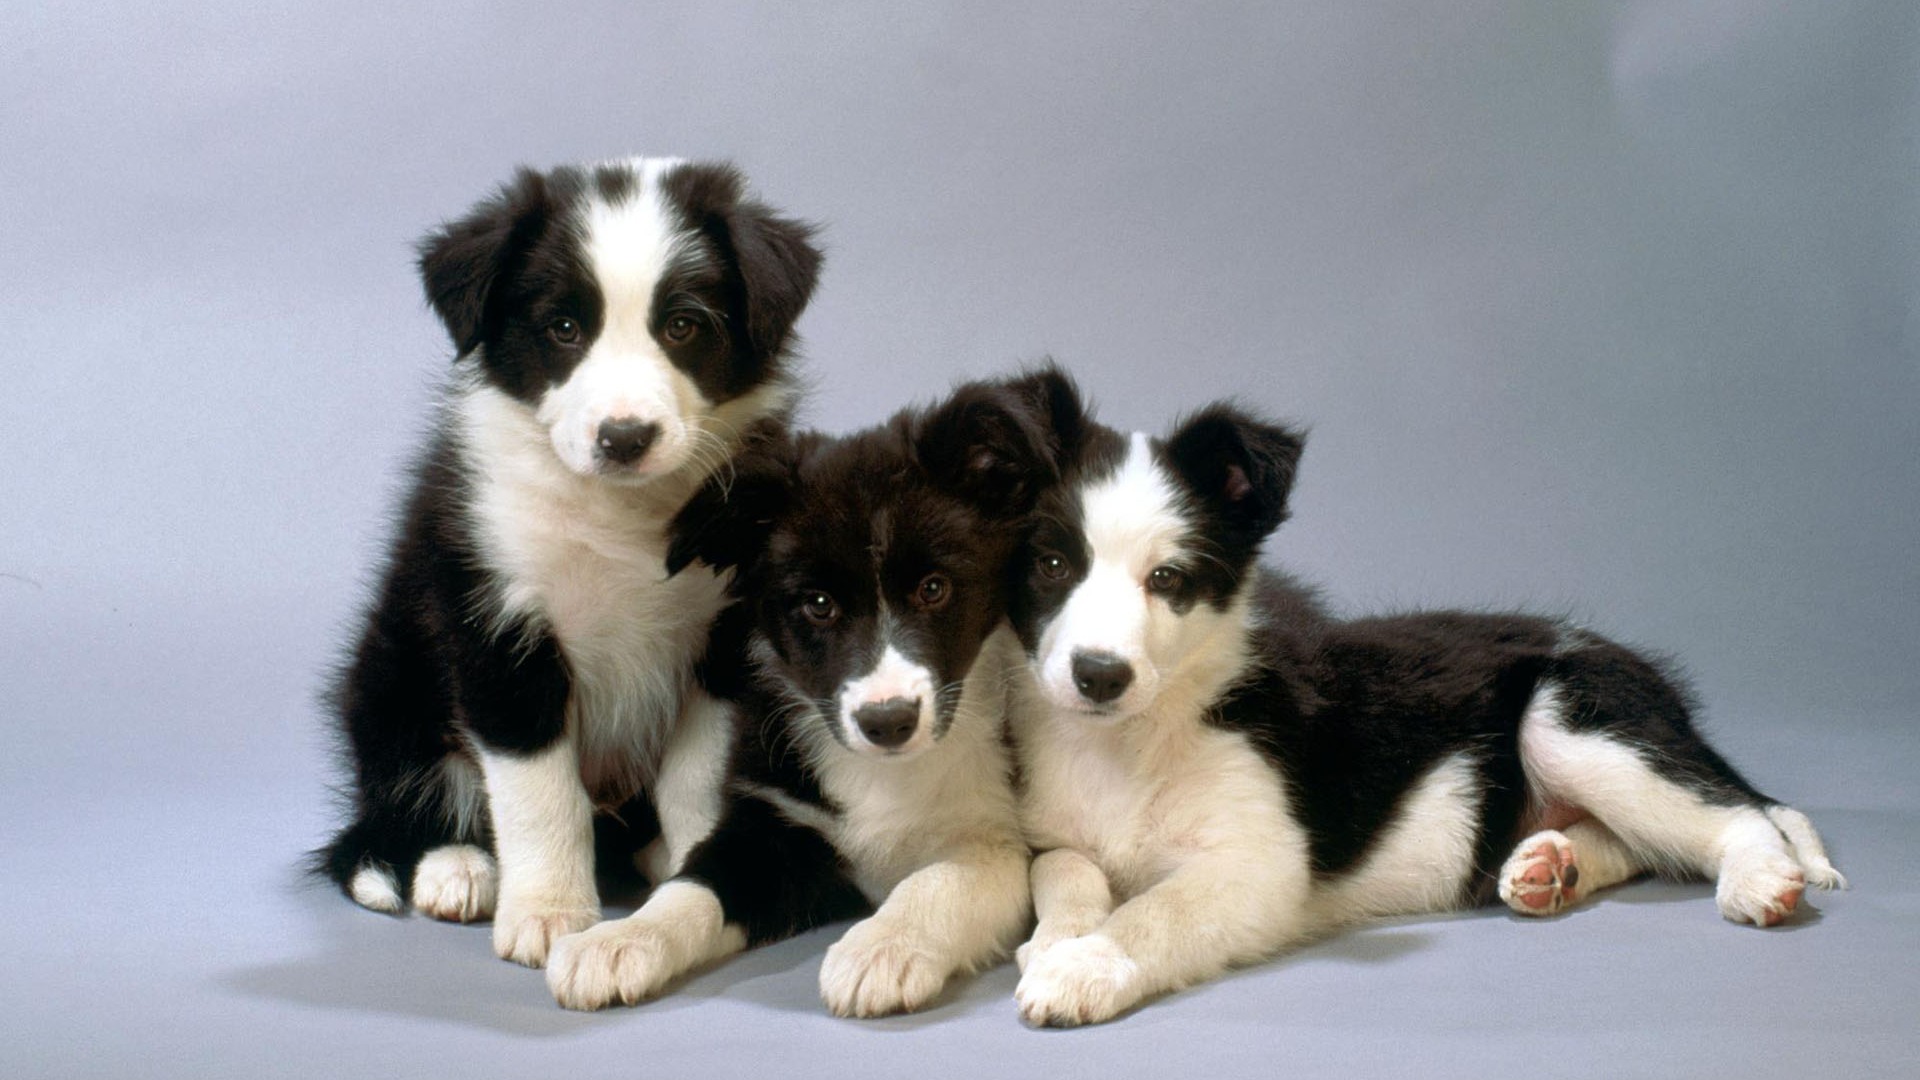 Puppy Photo HD wallpapers (1) #7 - 1920x1080